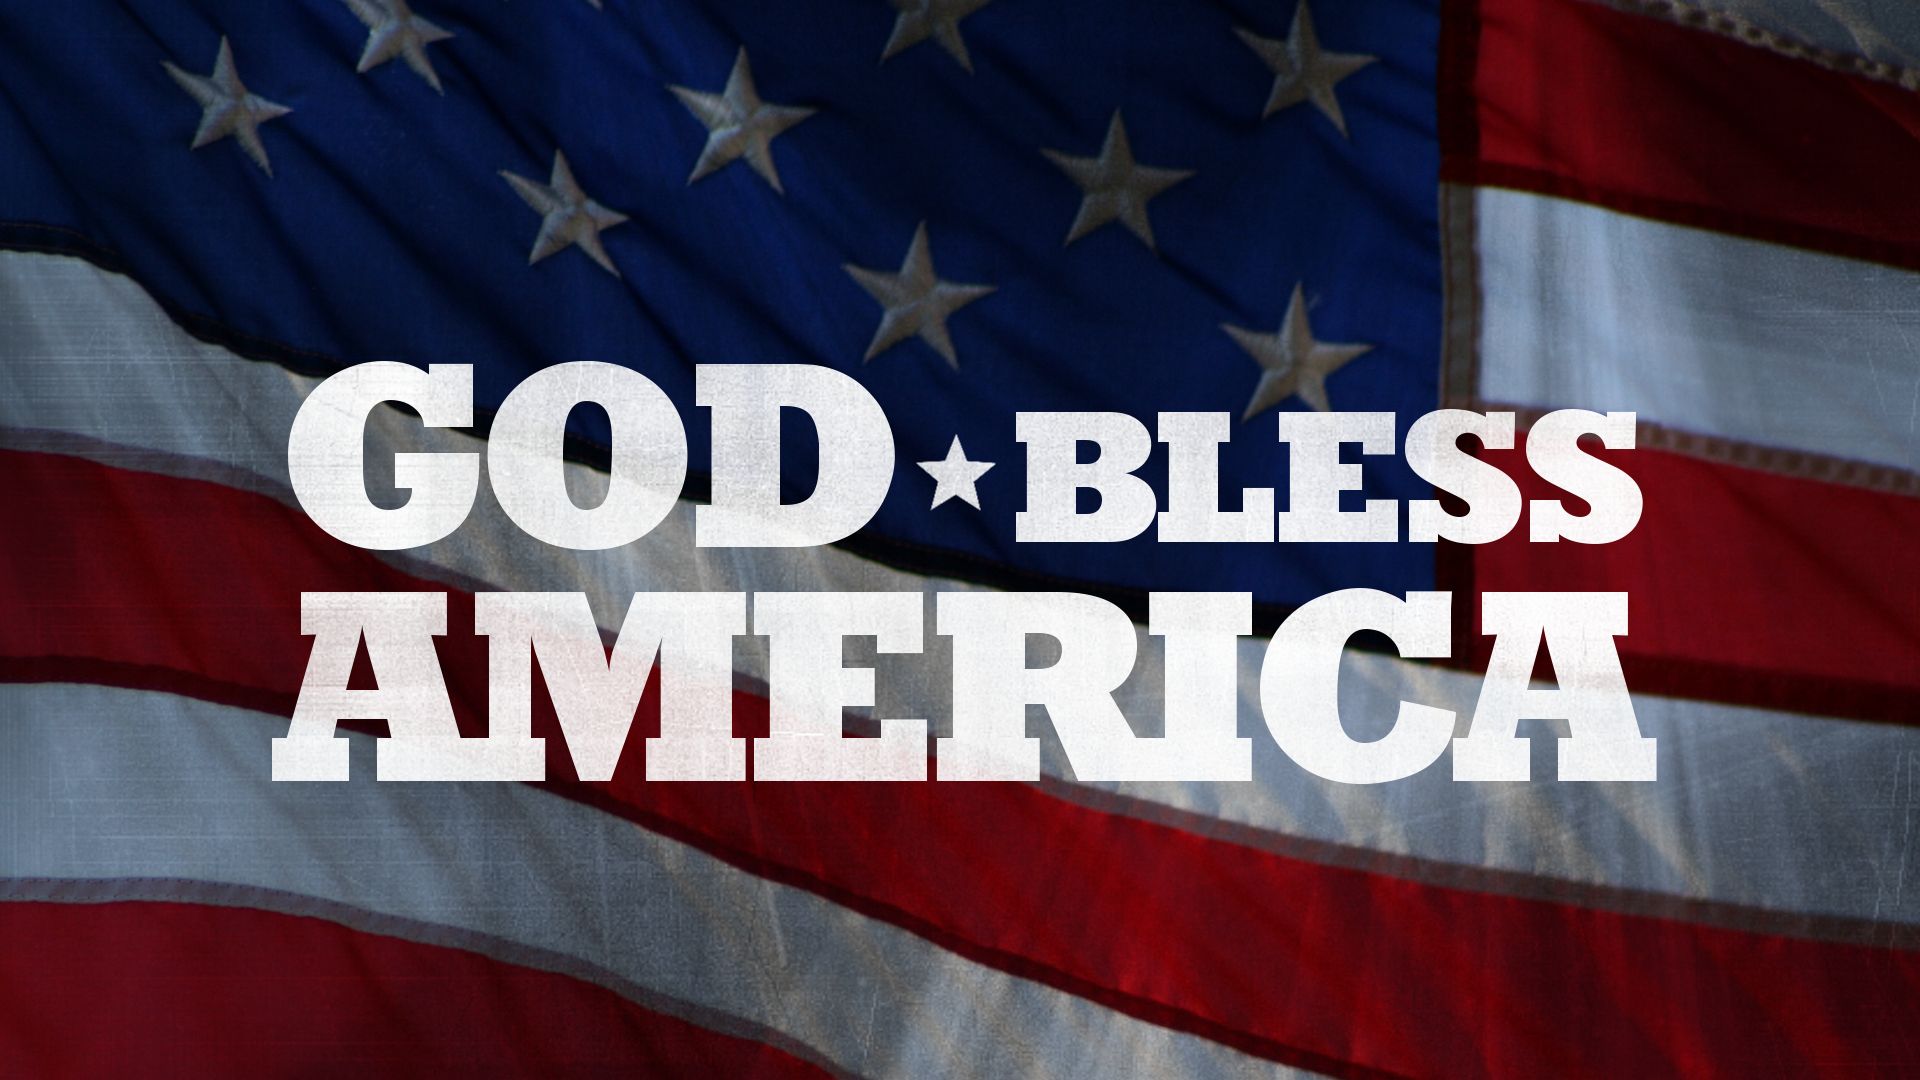 550 God Bless America Stock Photos Pictures  RoyaltyFree Images   iStock  Patriotic American flag Usa